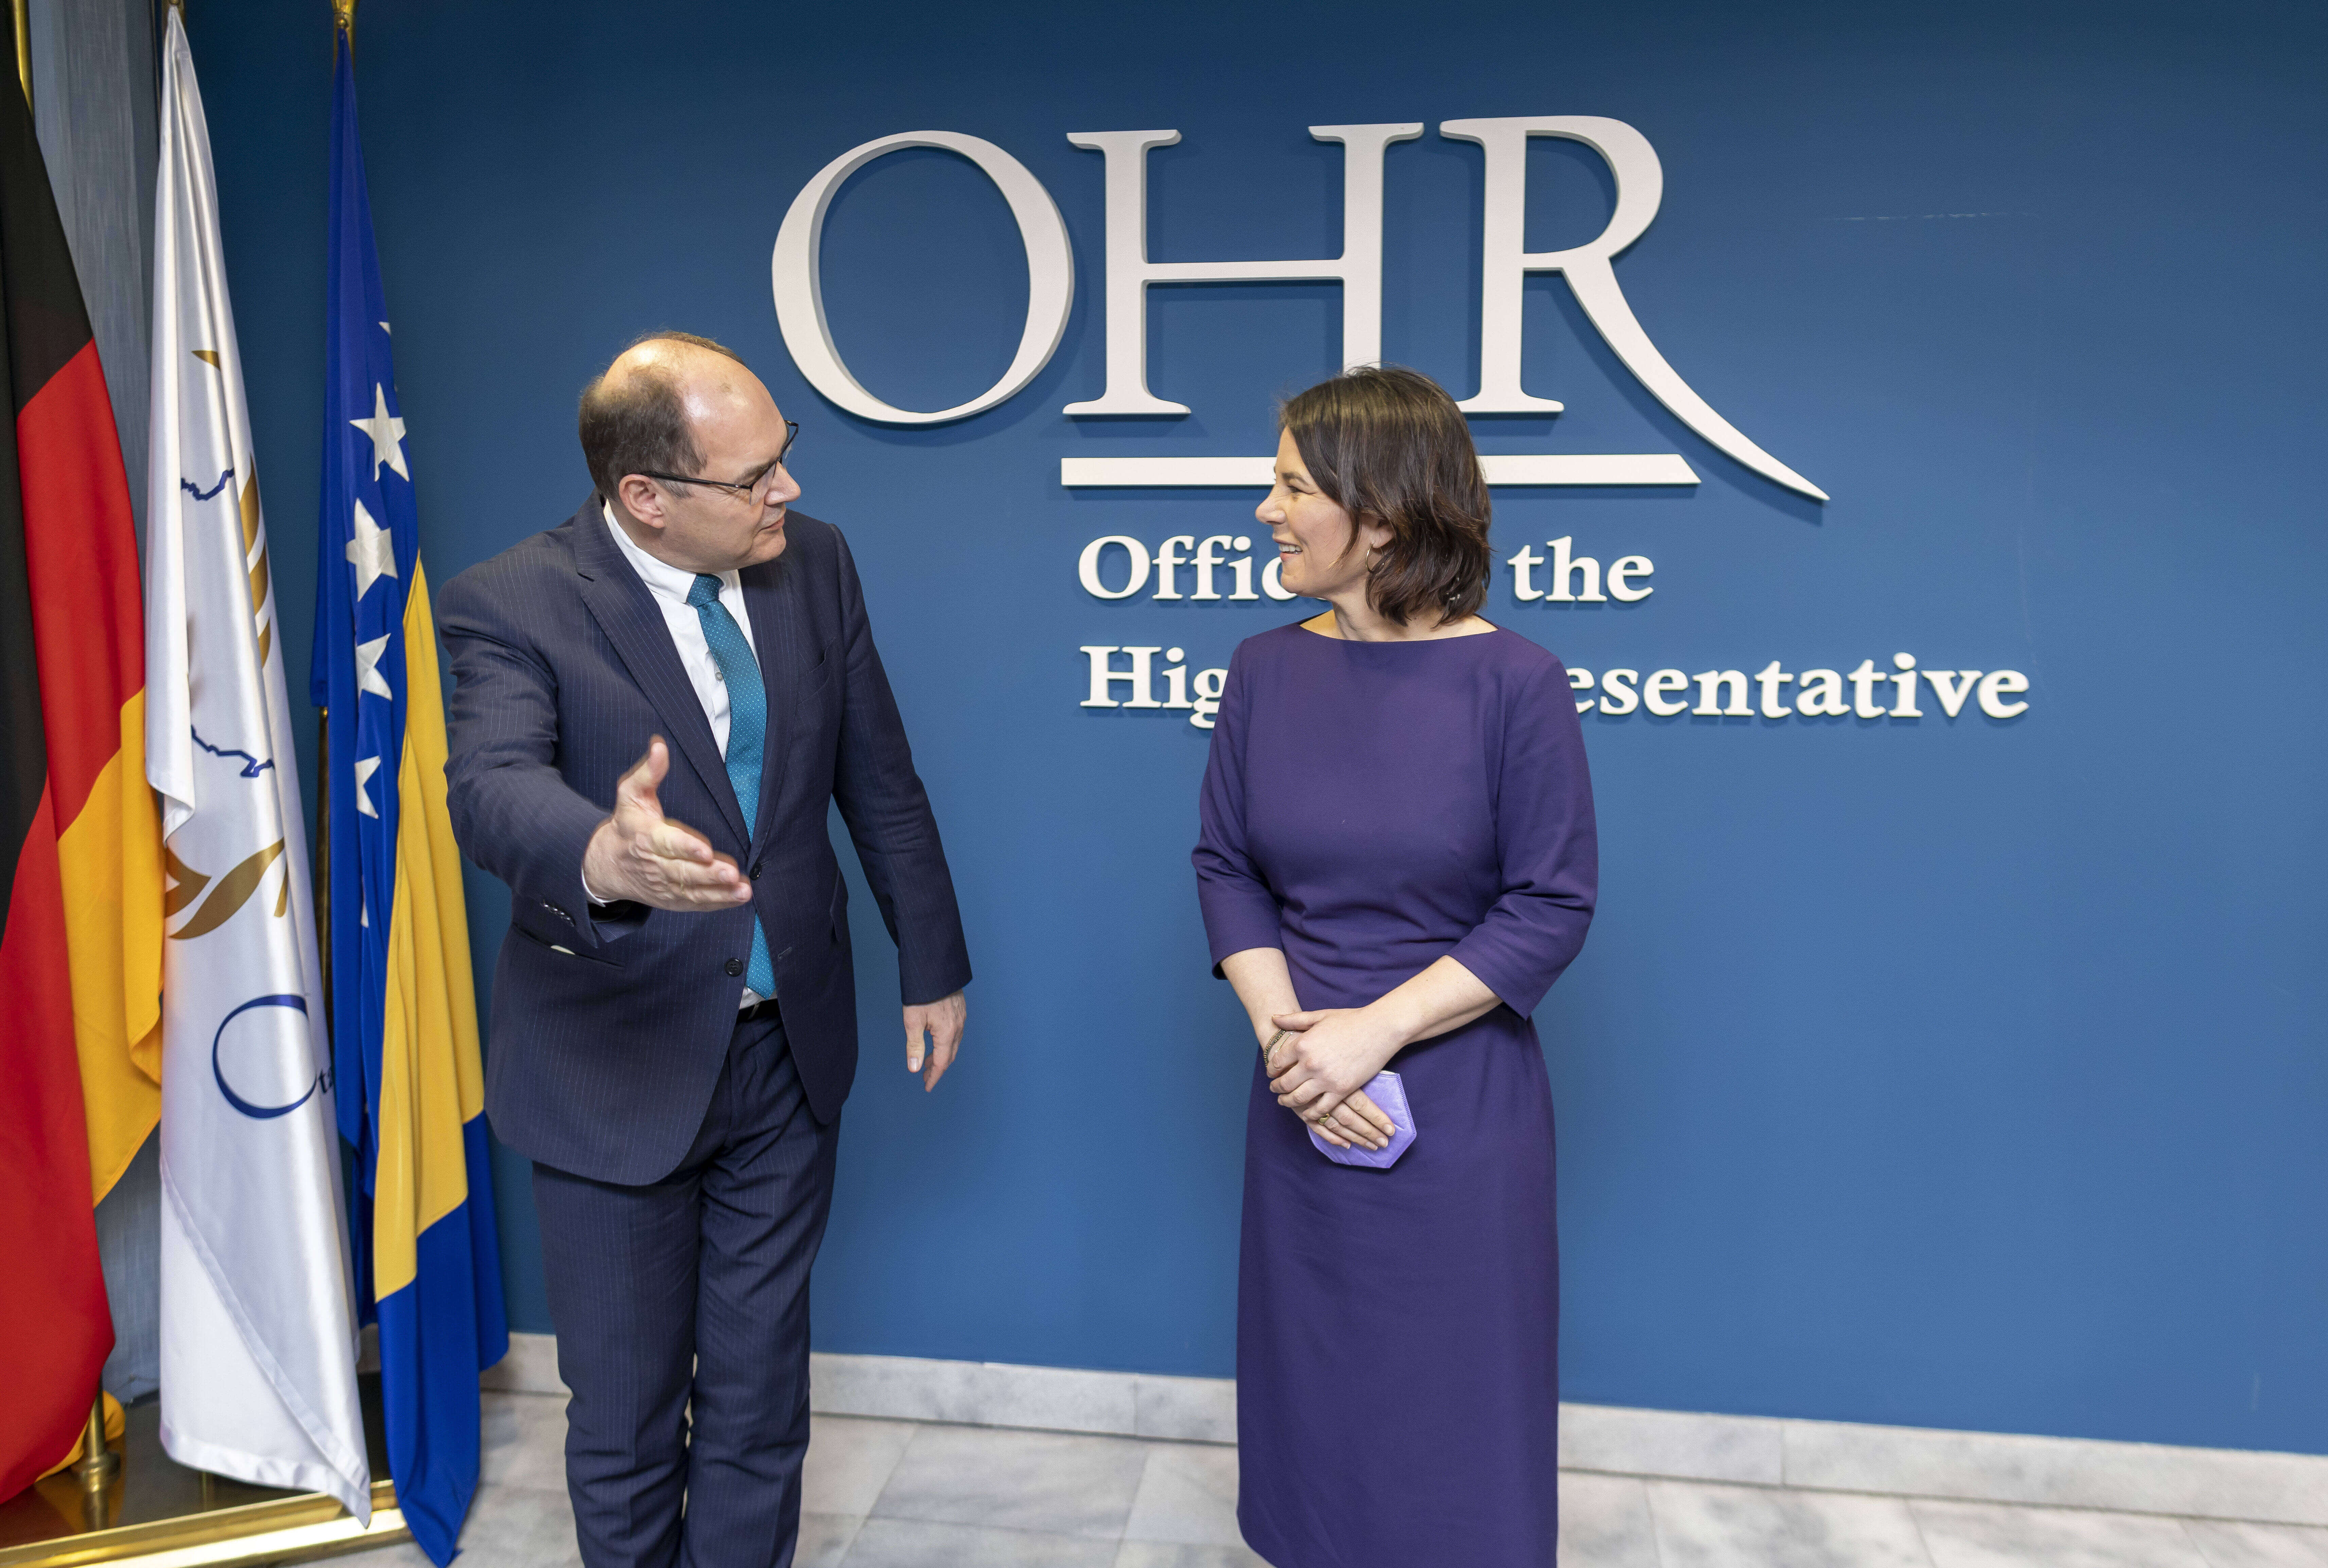 Mujanovic - German Foreign Minister Annalena Baerbock with Christian Schmidt, High Representative for Bosnia and Herzegovina in March 2022. Reuters